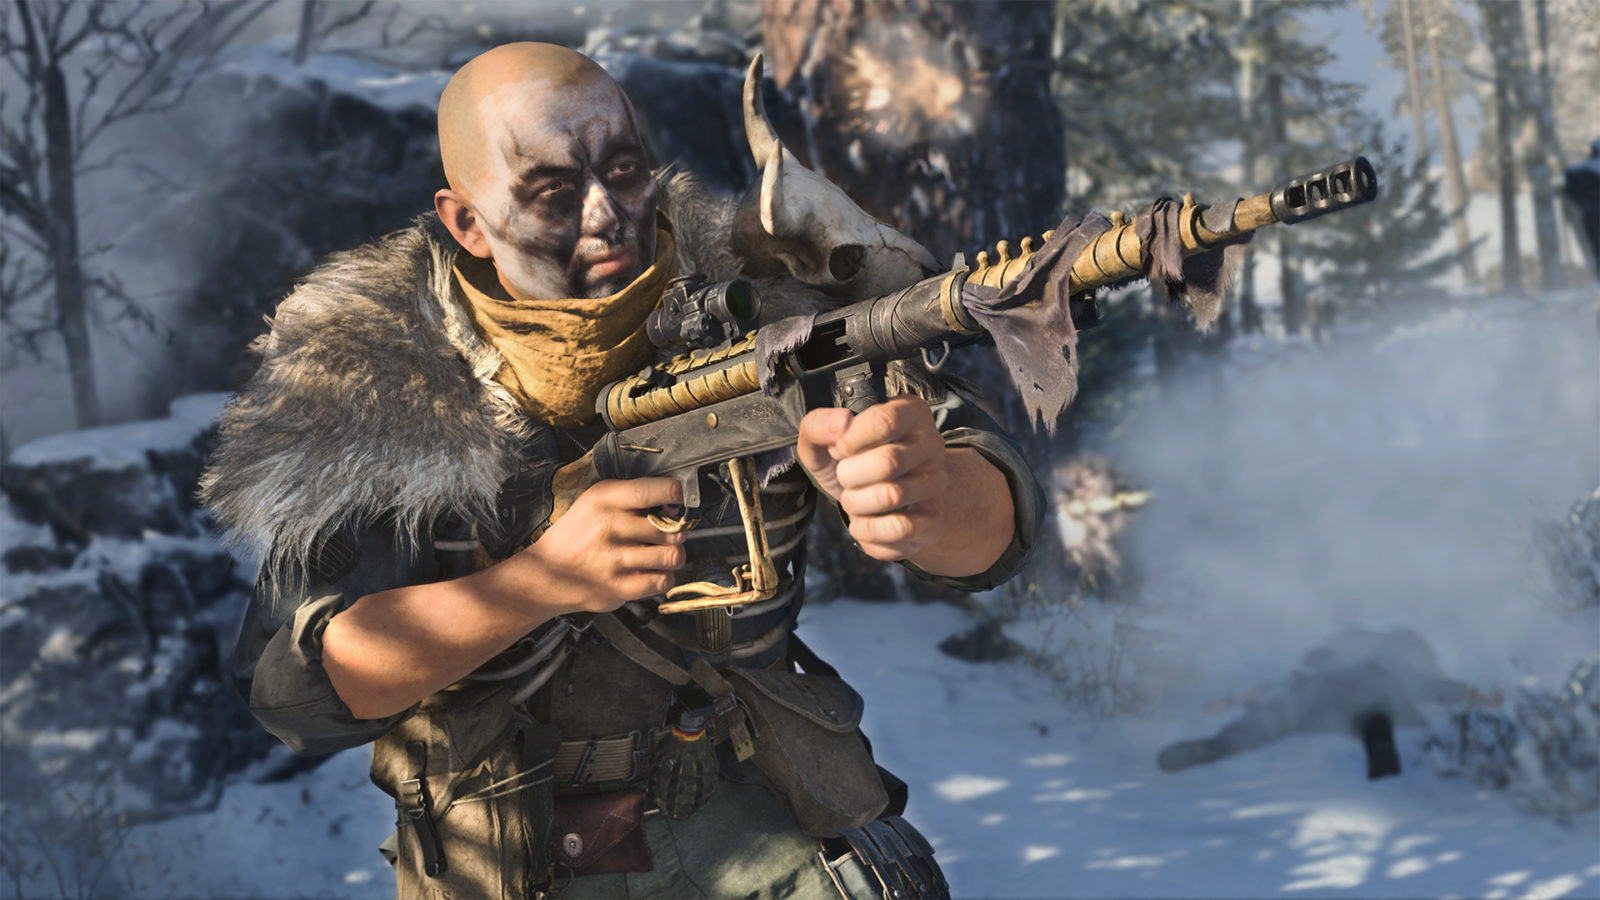 Snipers Call of Duty Warzone are finally being addressed